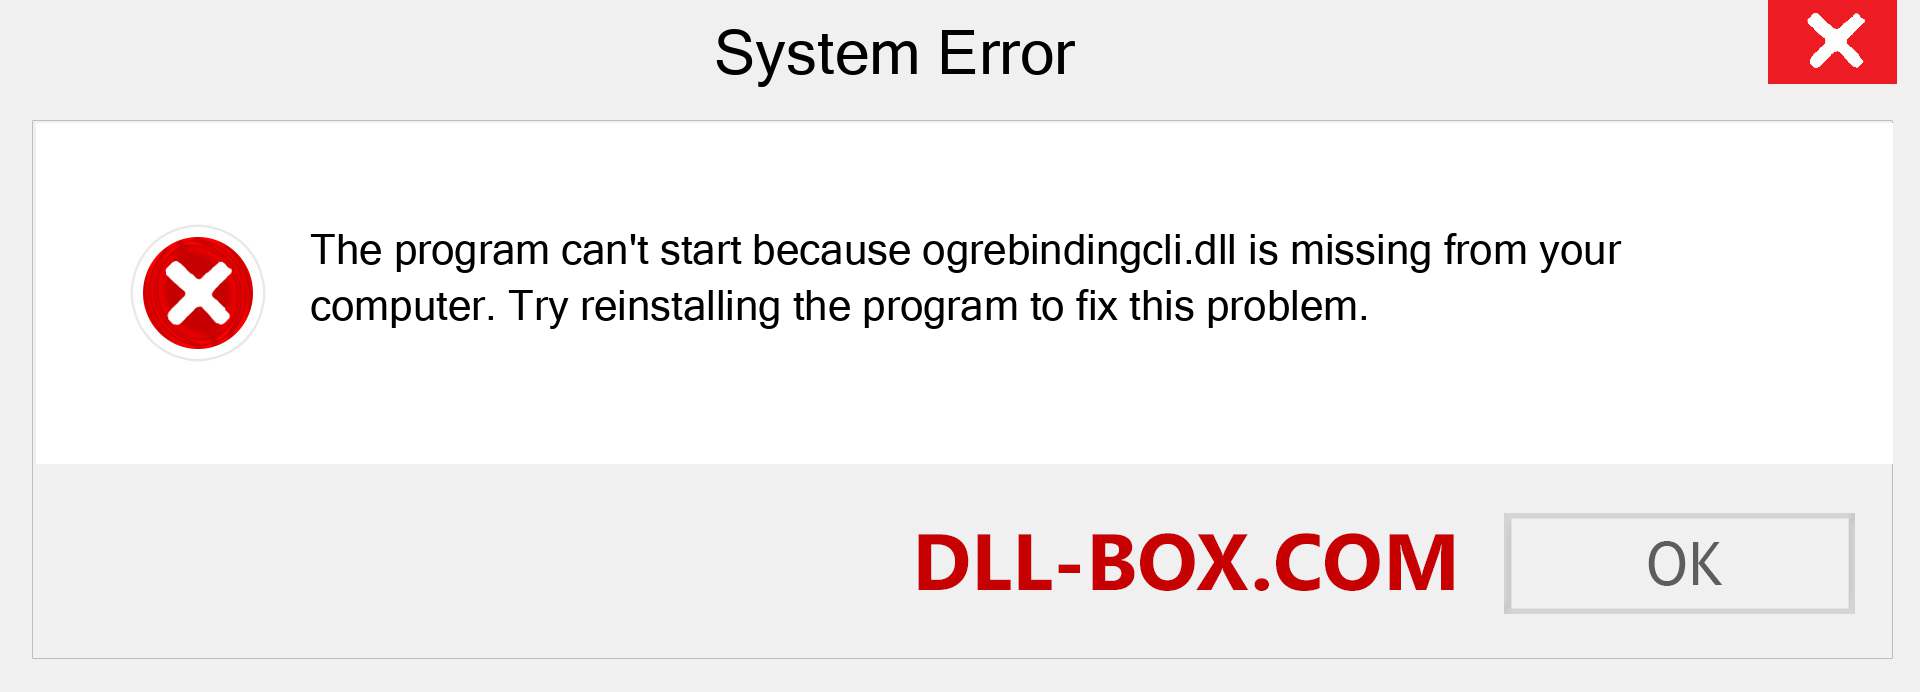  ogrebindingcli.dll file is missing?. Download for Windows 7, 8, 10 - Fix  ogrebindingcli dll Missing Error on Windows, photos, images